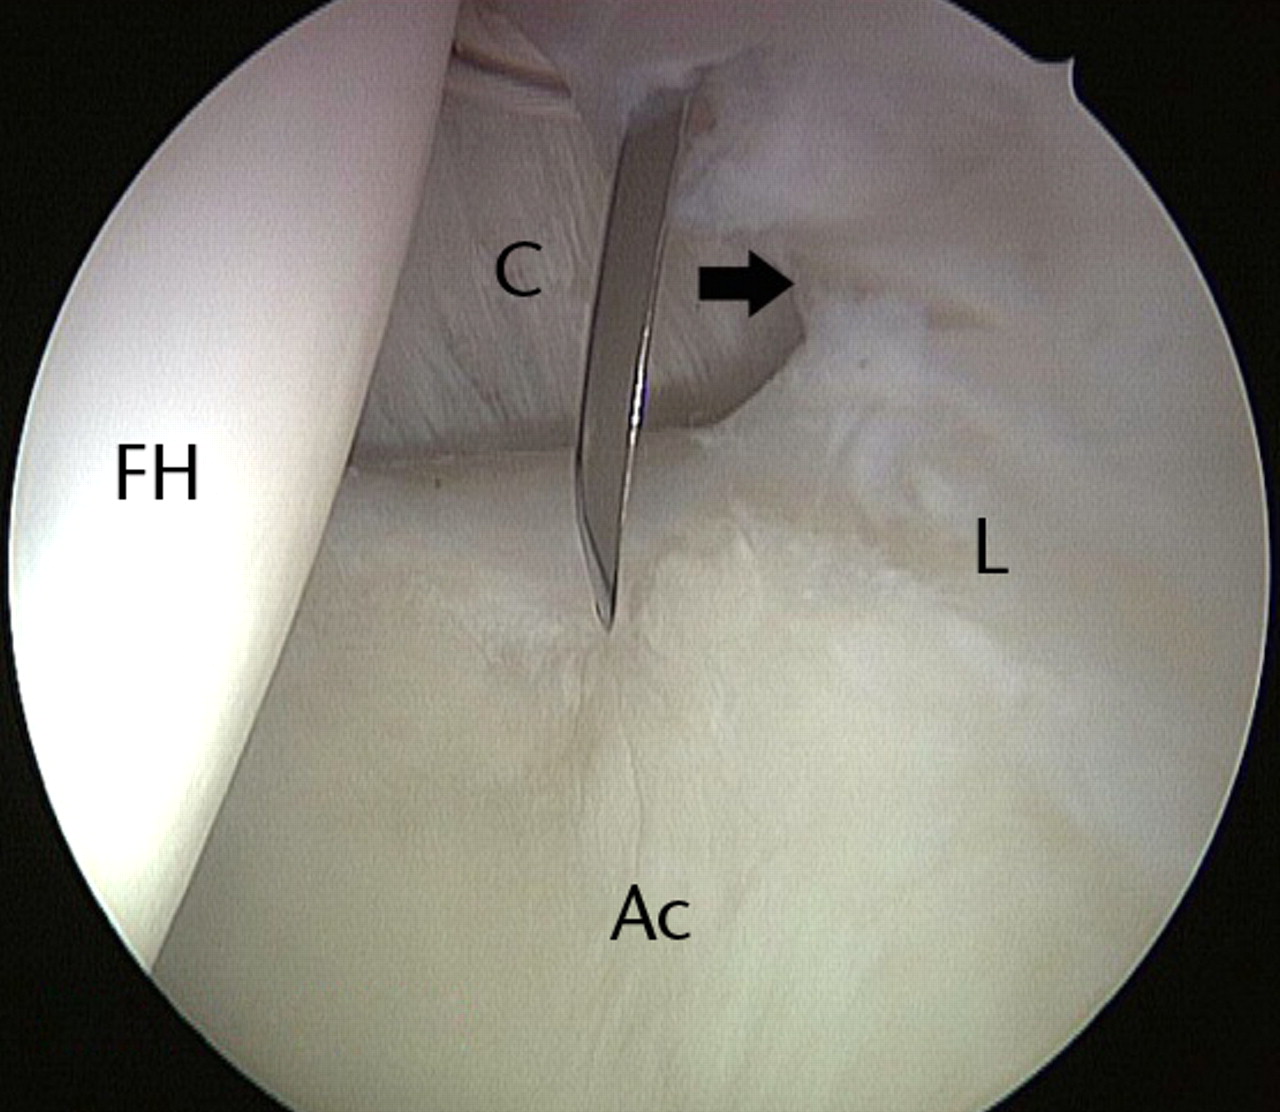 Figs. 9a - 9c 
          Arthroscopic images of the left
hip of a 36-year-old woman who had a previous hip arthroscopy three
years earlier, showing a) capsulolabral adhesions (arrow) in the
area of the perilabral sulcus corresponding to the previous surgical
intervention, in contrast to the normal capsule seen further anteriorly,
b) removal of the adhesions, and c) chondroplasty with labral repair
using a suture anchor. Symptoms improved as early as eight weeks post-operatively
(FH, femoral head; Ac, acetabulum; L, labrum; C, capsule).
        